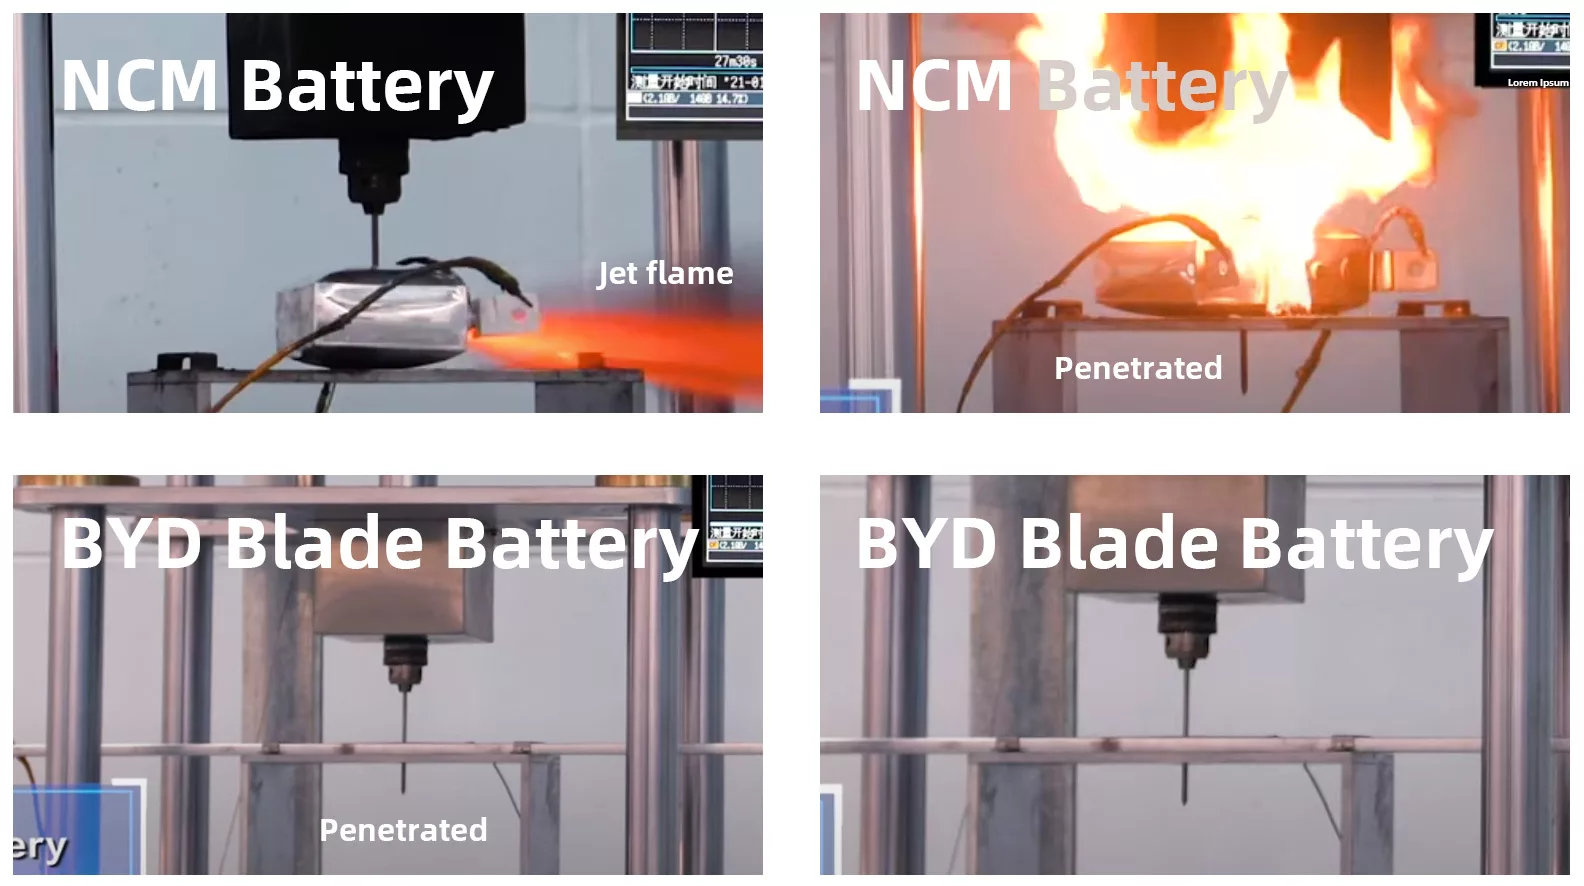 the Blade Battery passed extreme test conditions, including crushing, bending, exposure to high temperatures, and overcharging. None of these tests resulted in a fire or explosion